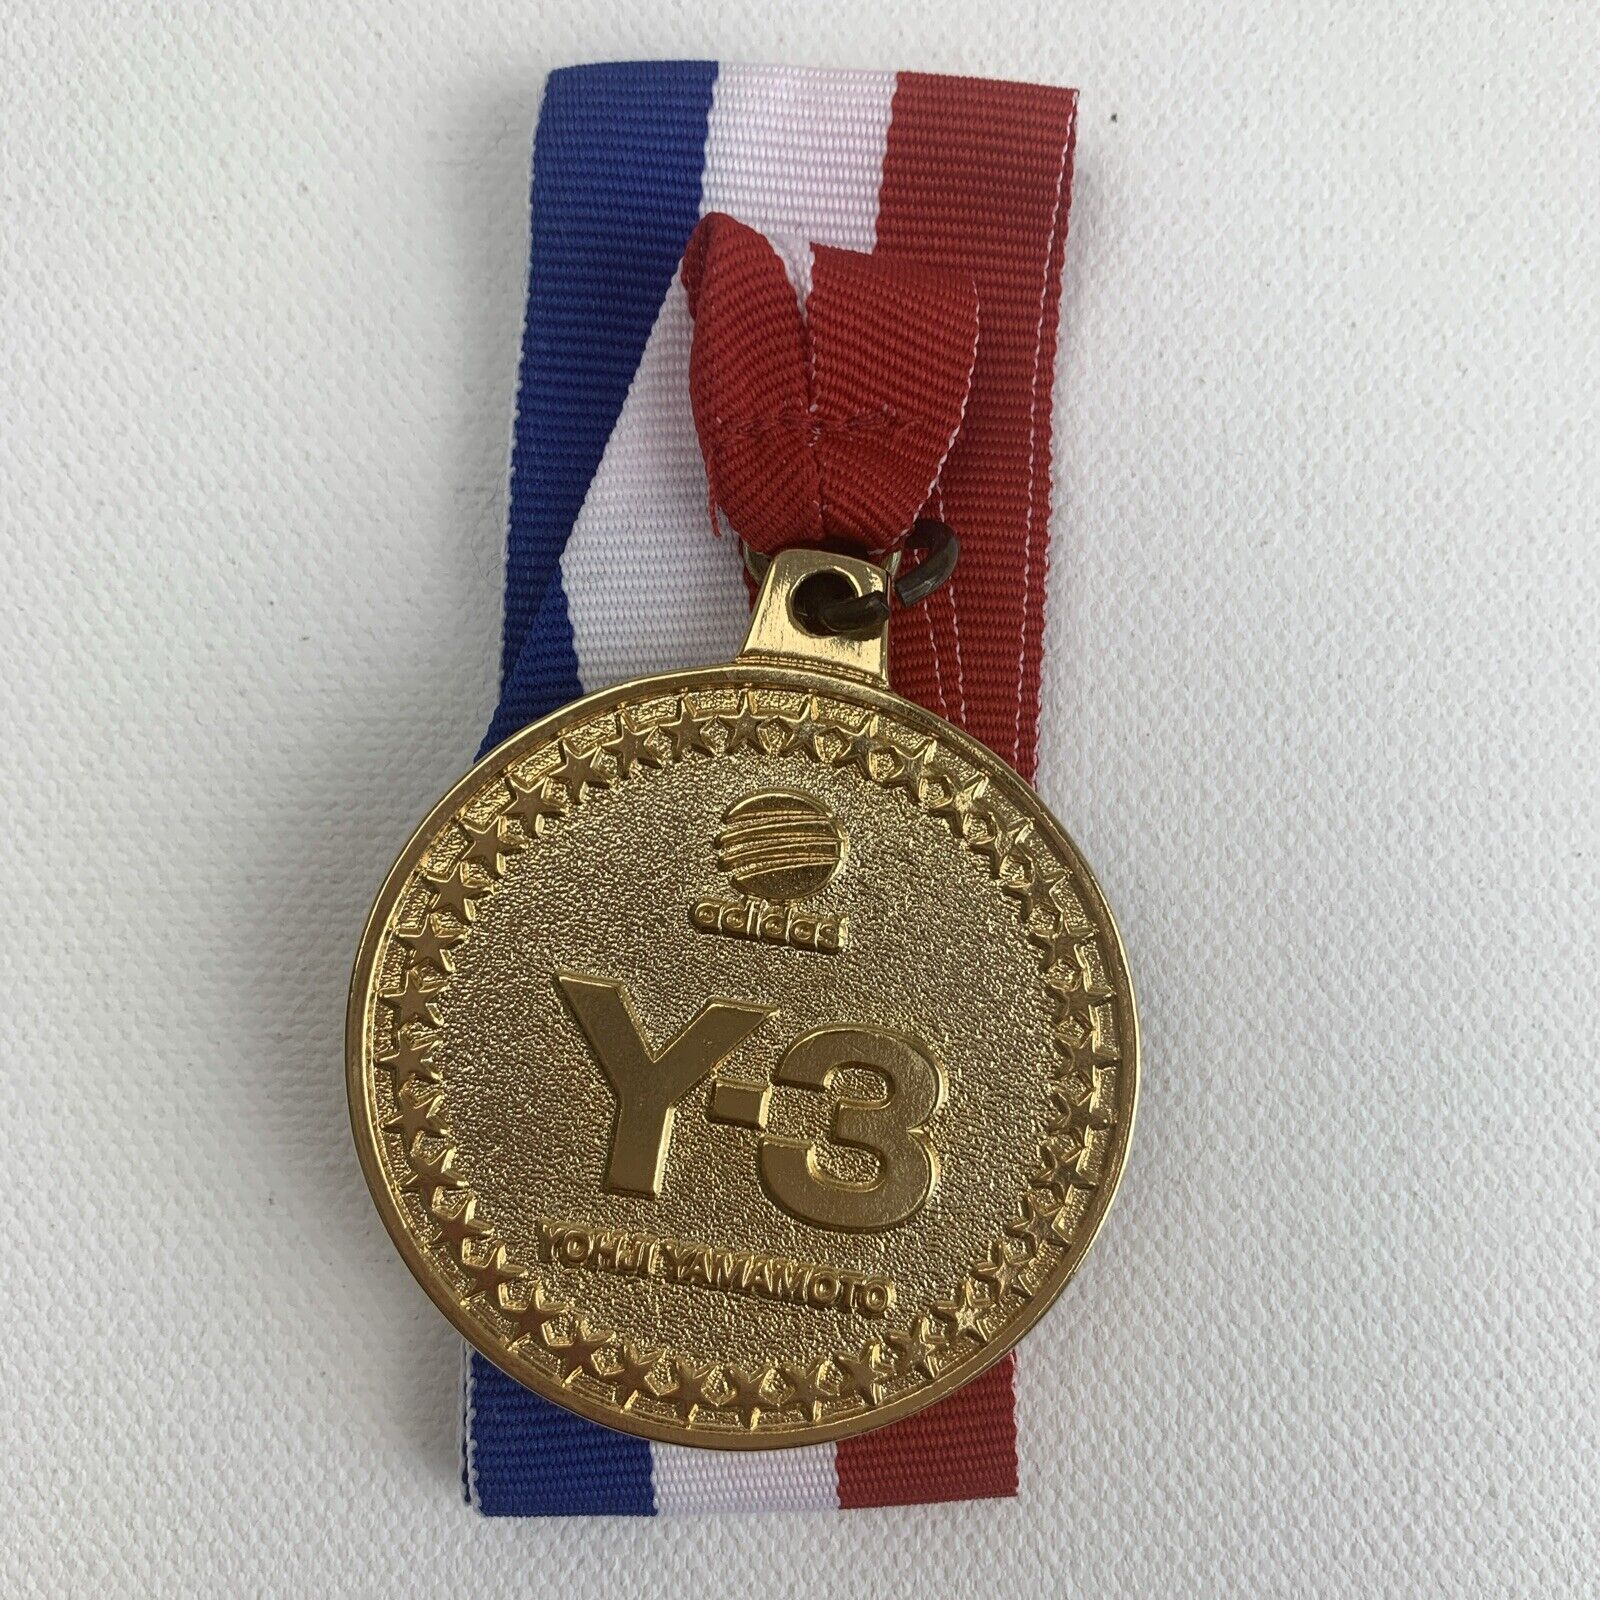 Adidas Yohji Yamamoto Y-3 Gold Color Medal Red White Blue Ribbon Collectable